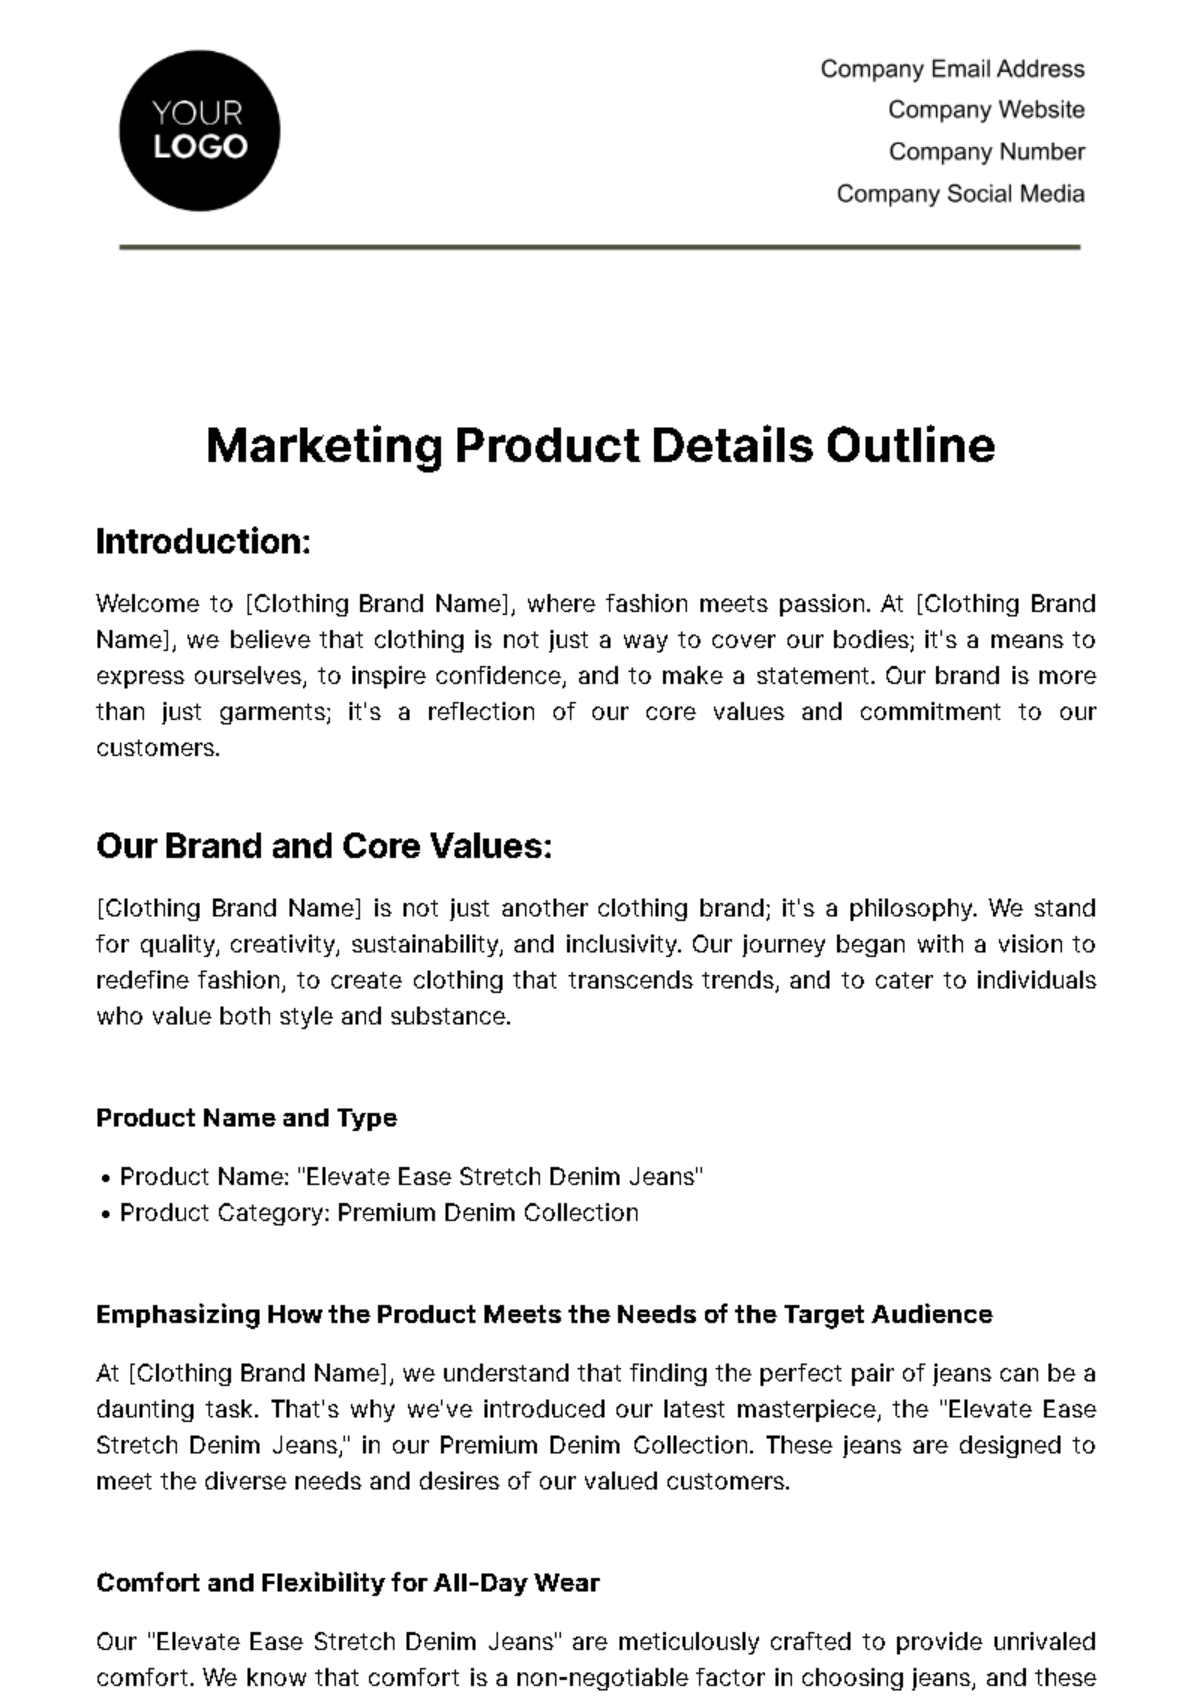 Free Marketing Product Details Outline Template